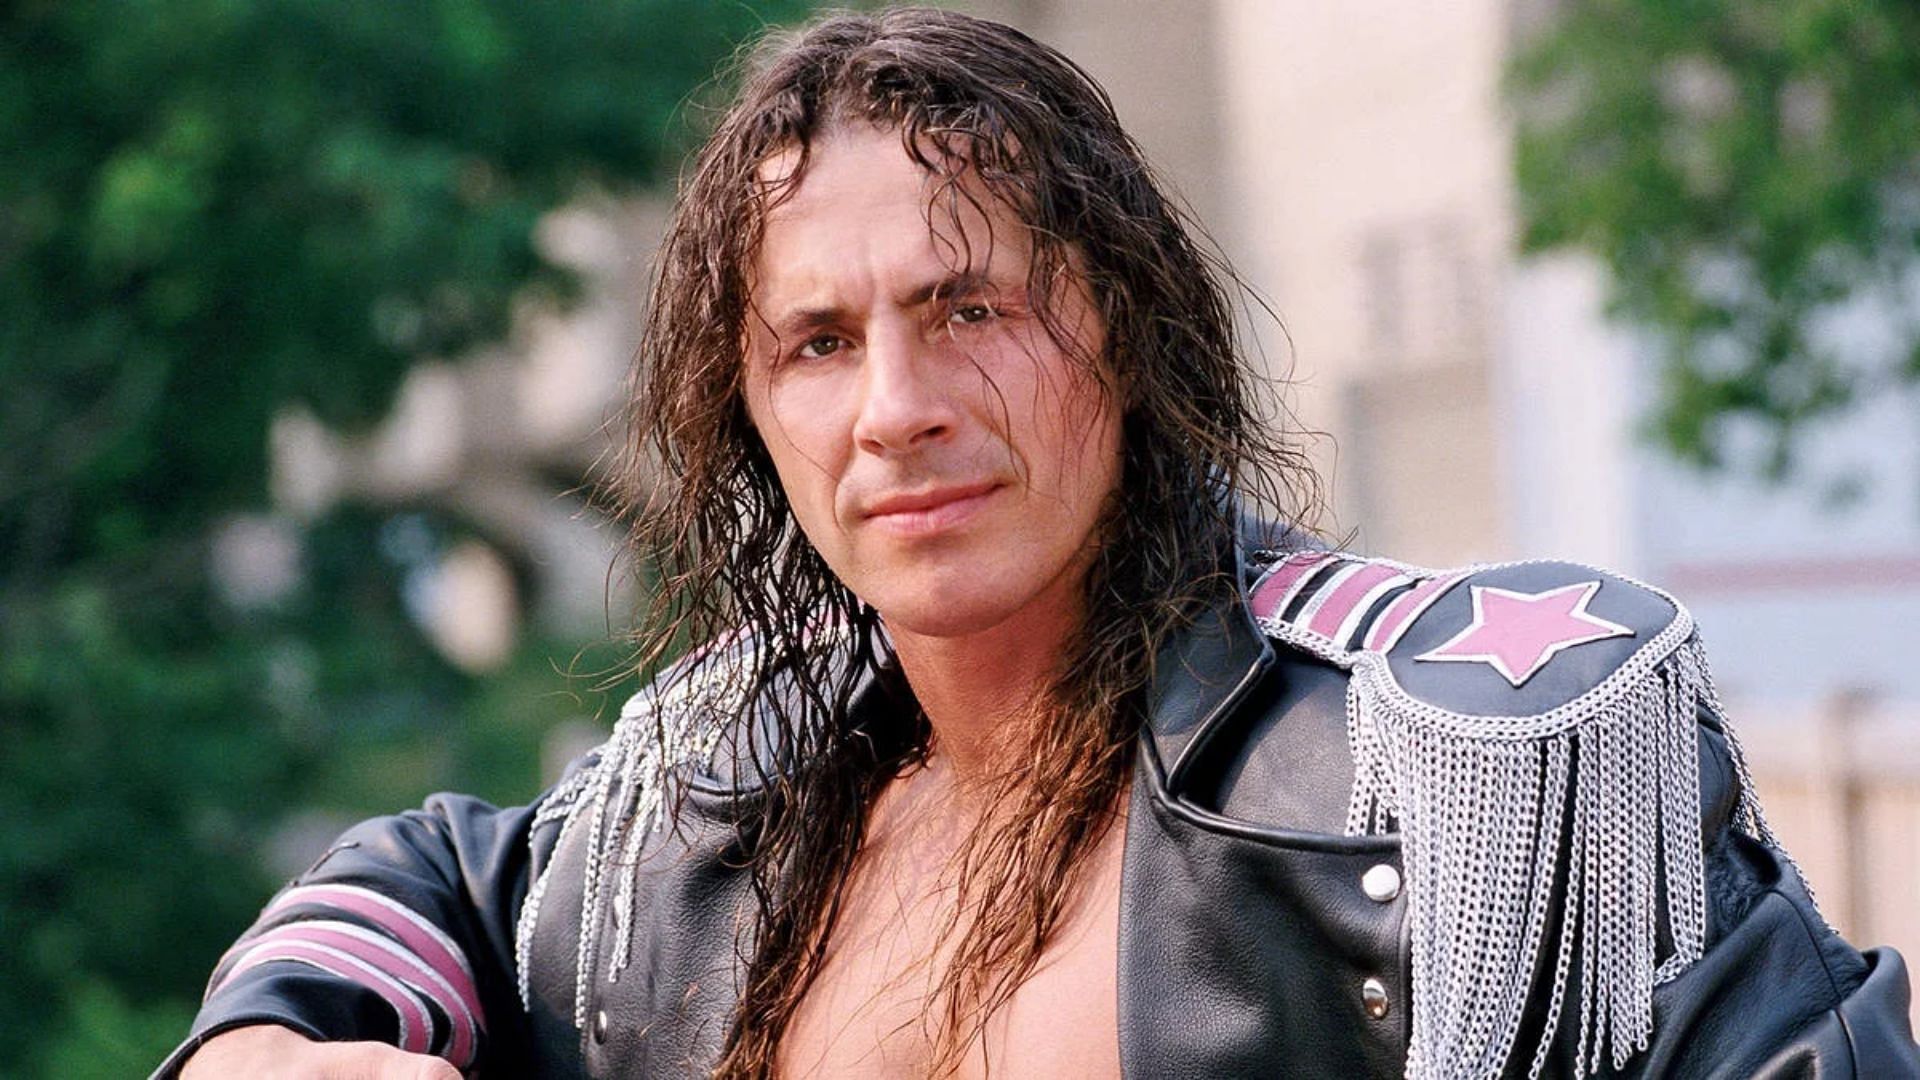 Bret Hart is one of the wrestling industry